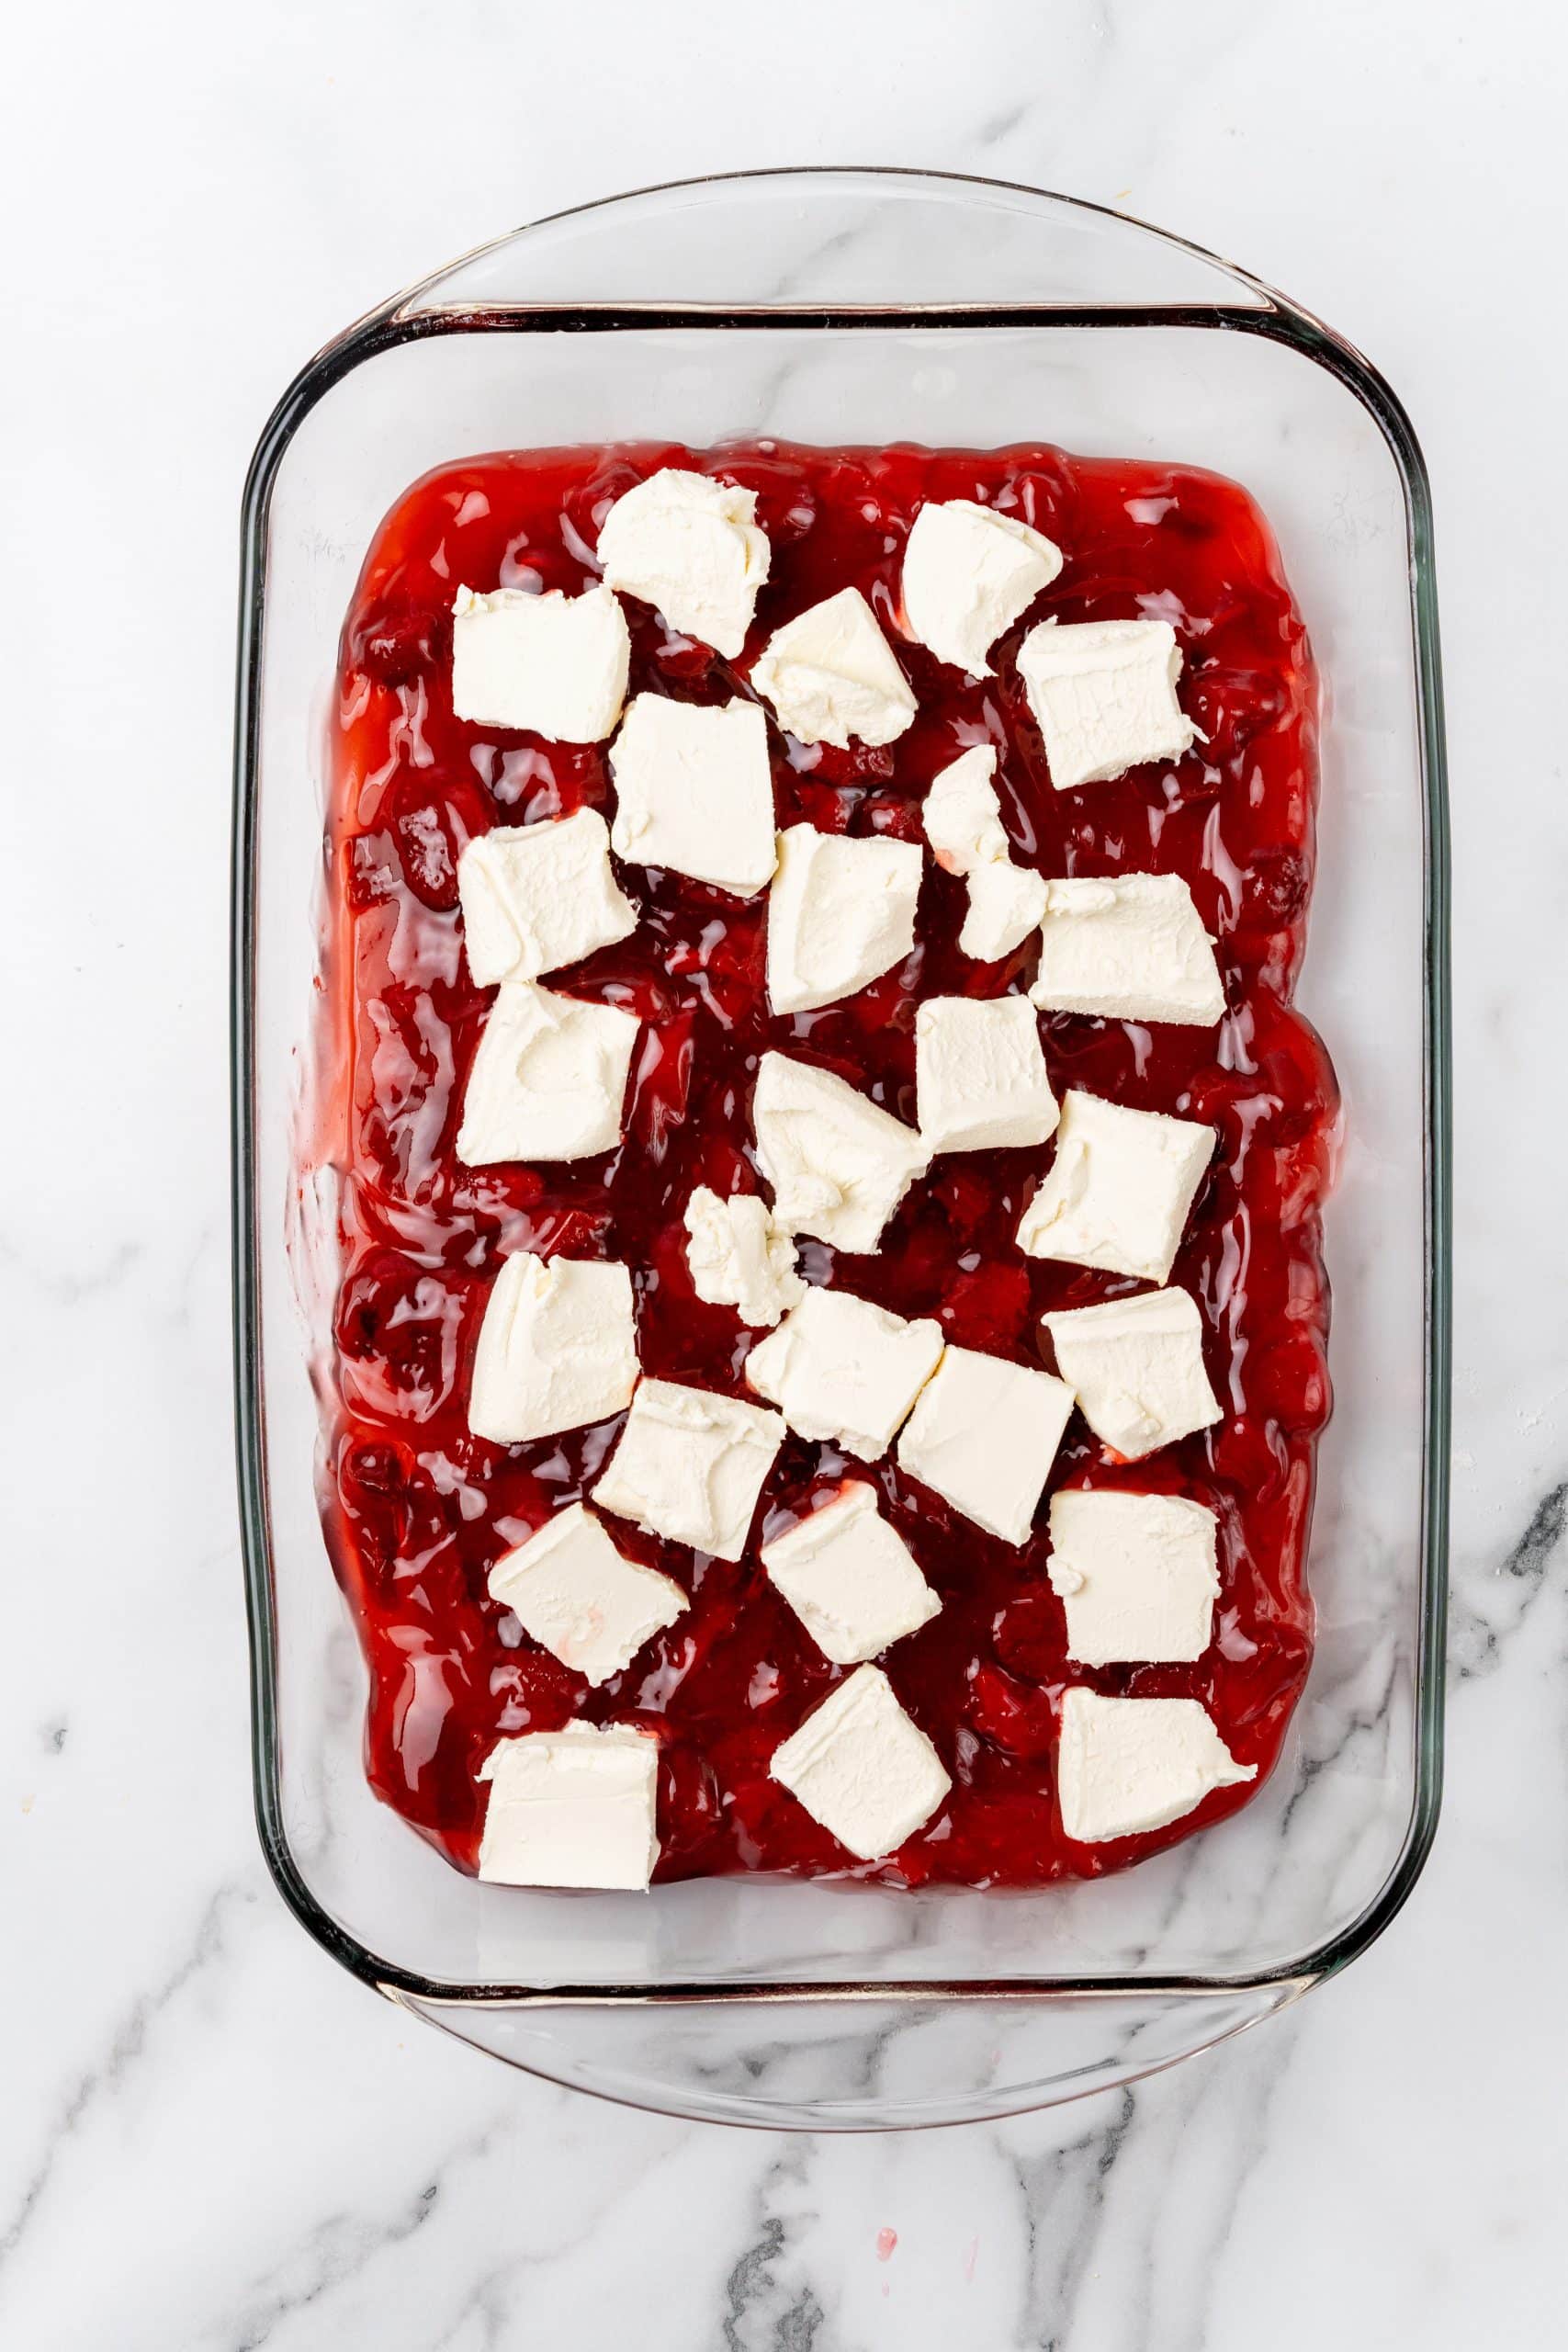 slices of cream cheese laid out on top of strawberry pie filling in a glass baking dish